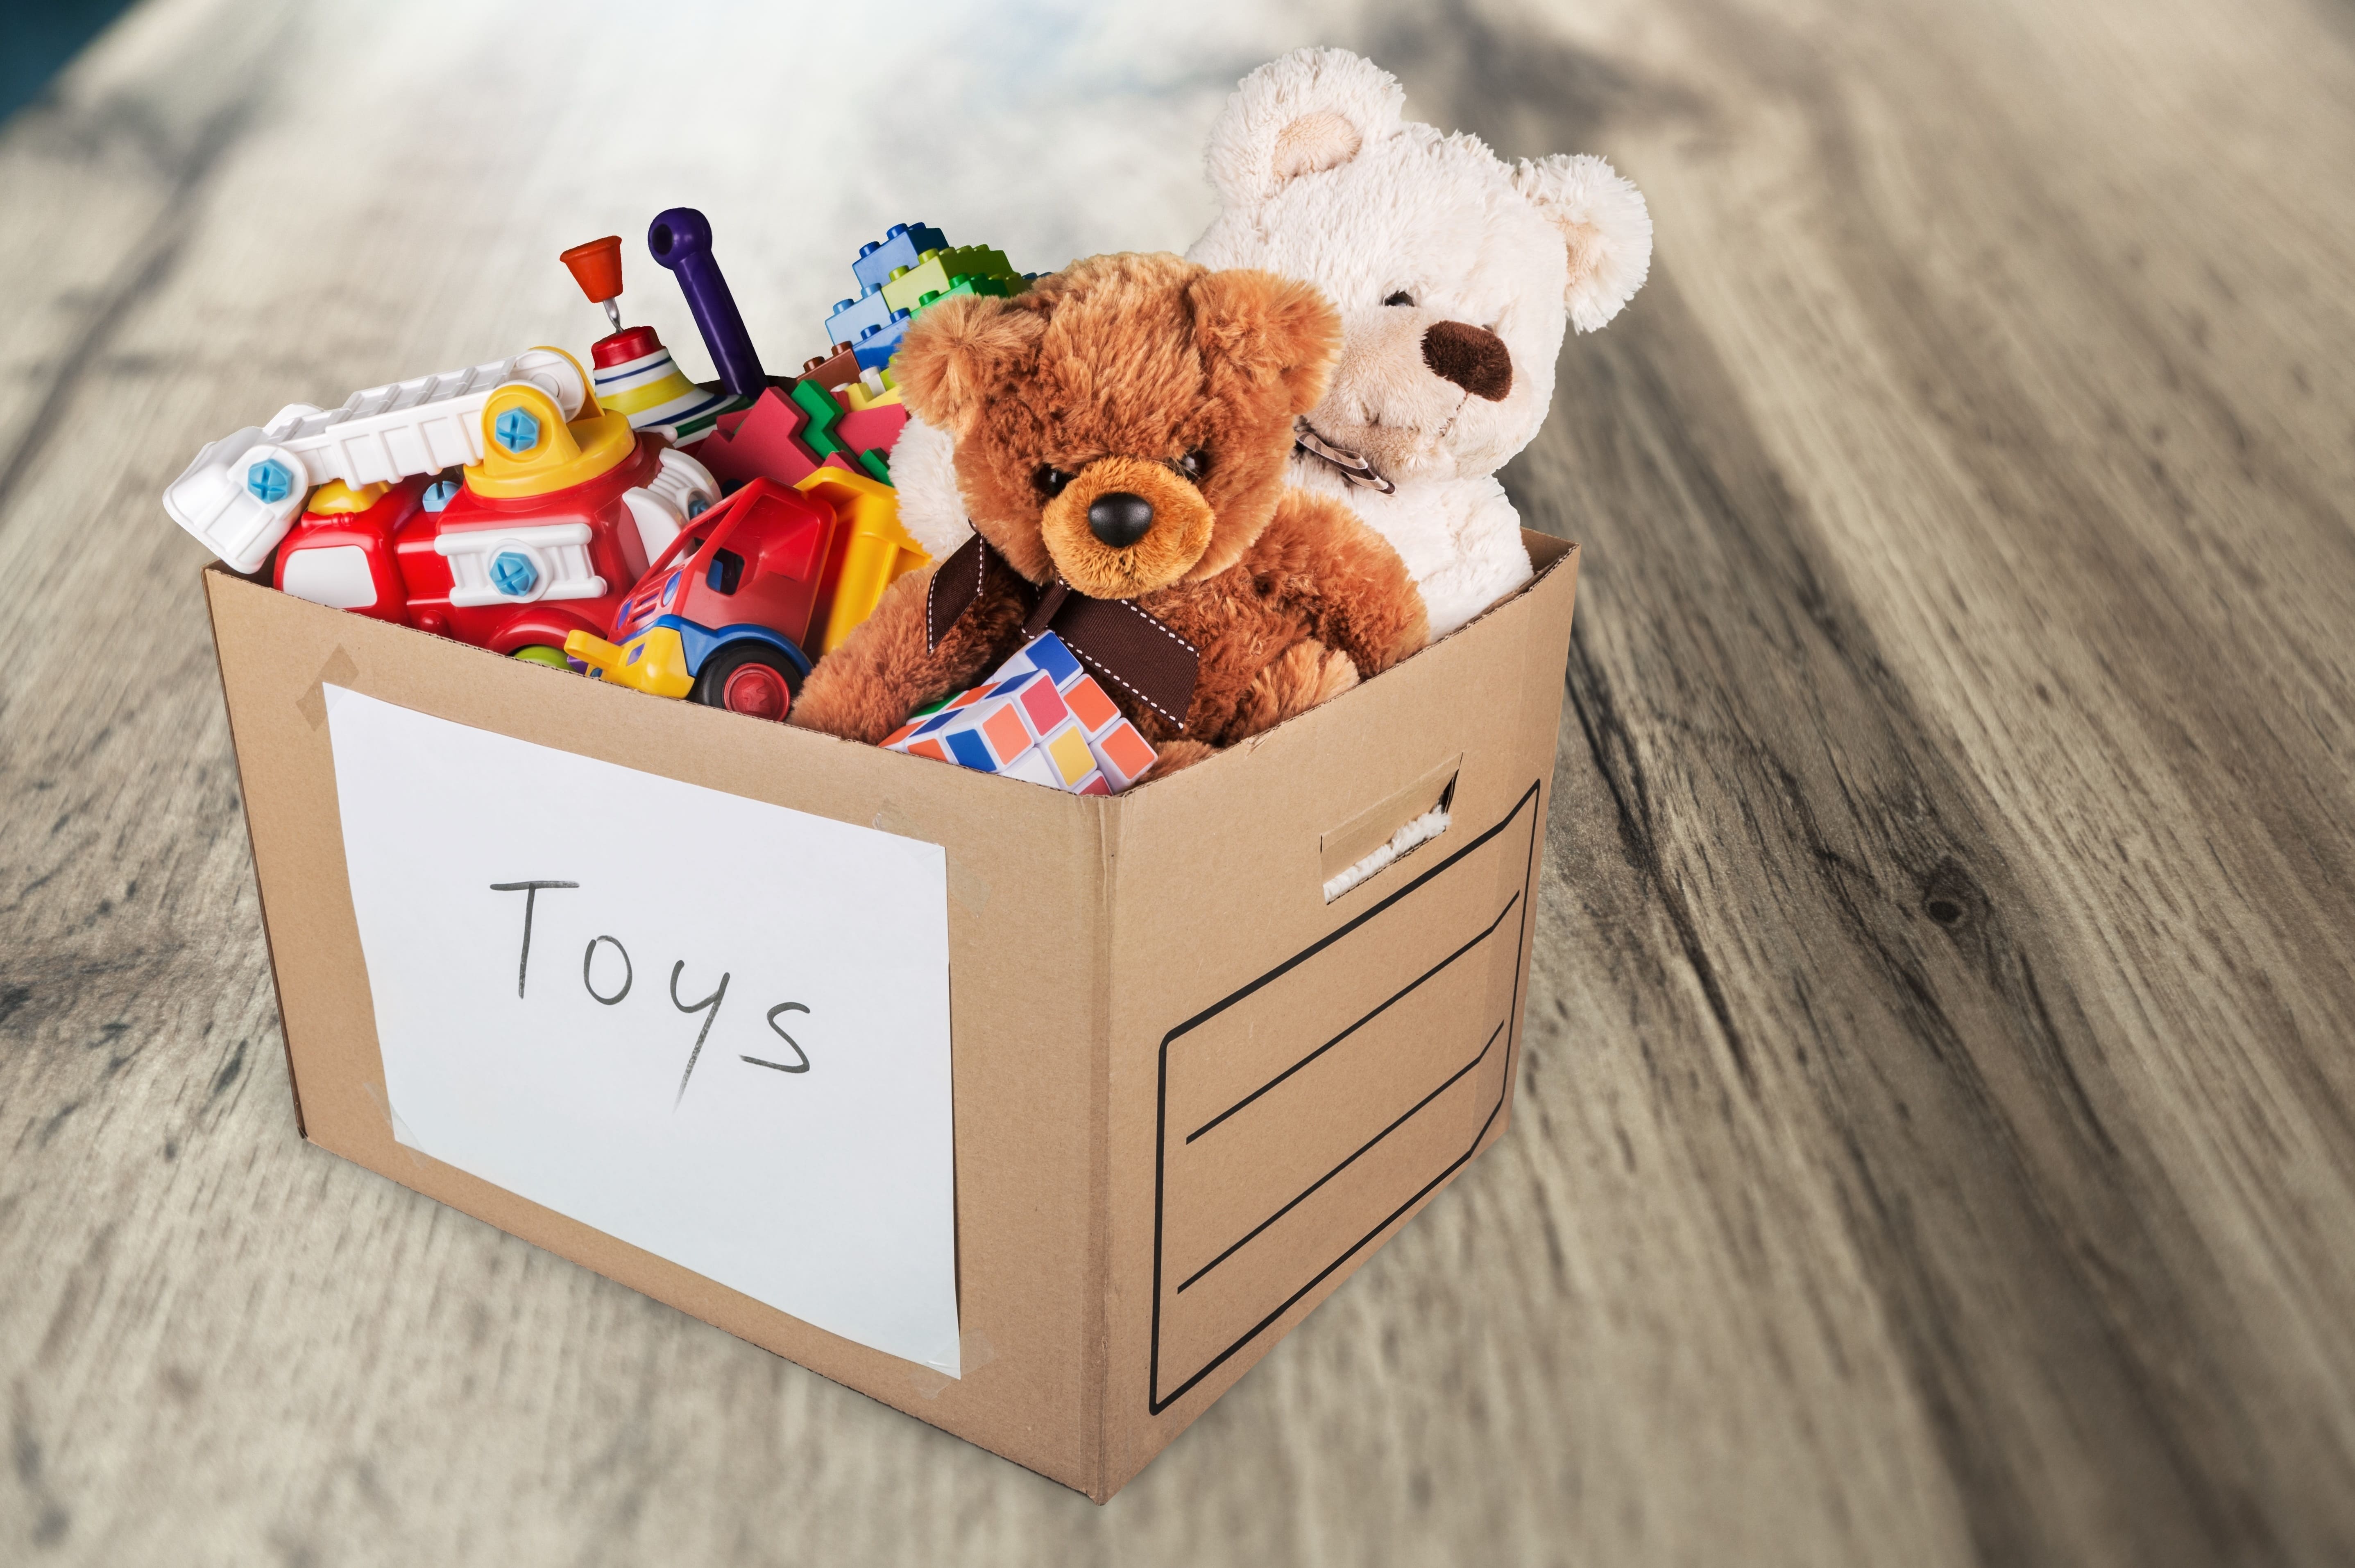 cardboard box labelled toys filled with toys and teddies sits on a wooden desk